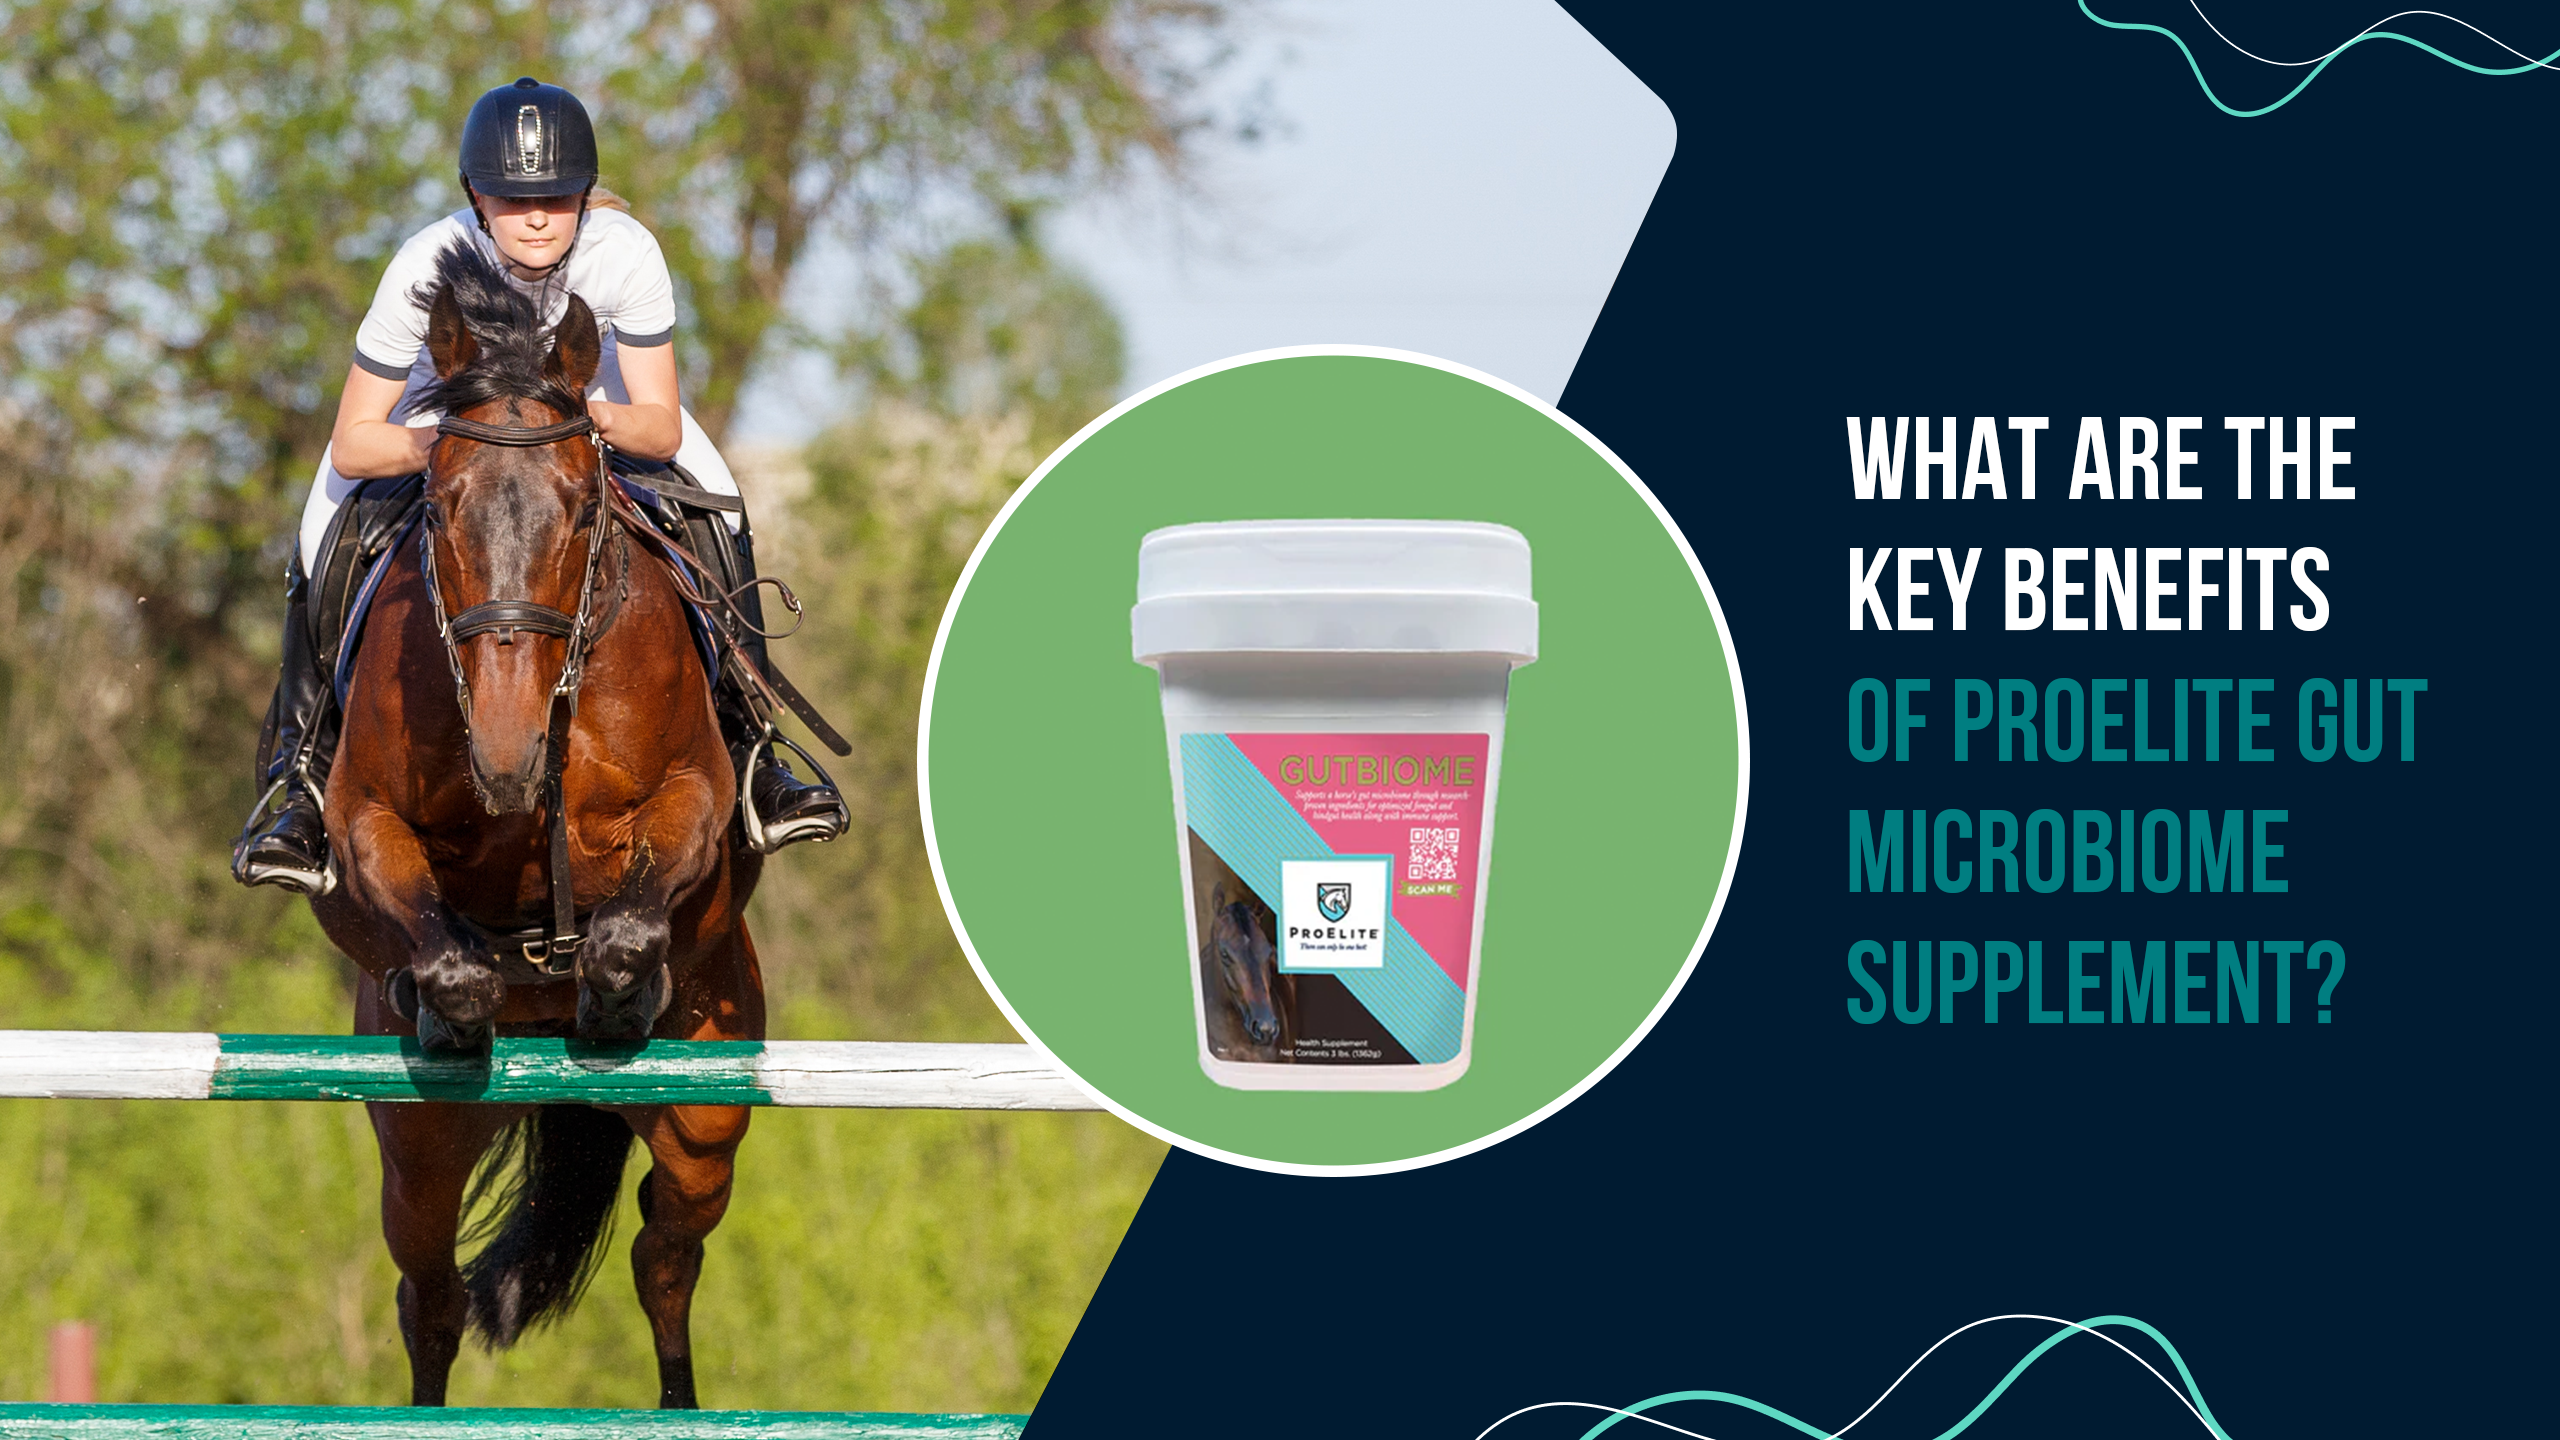 What Are the Key Benefits of ProElite Gut Microbiome Supplement?